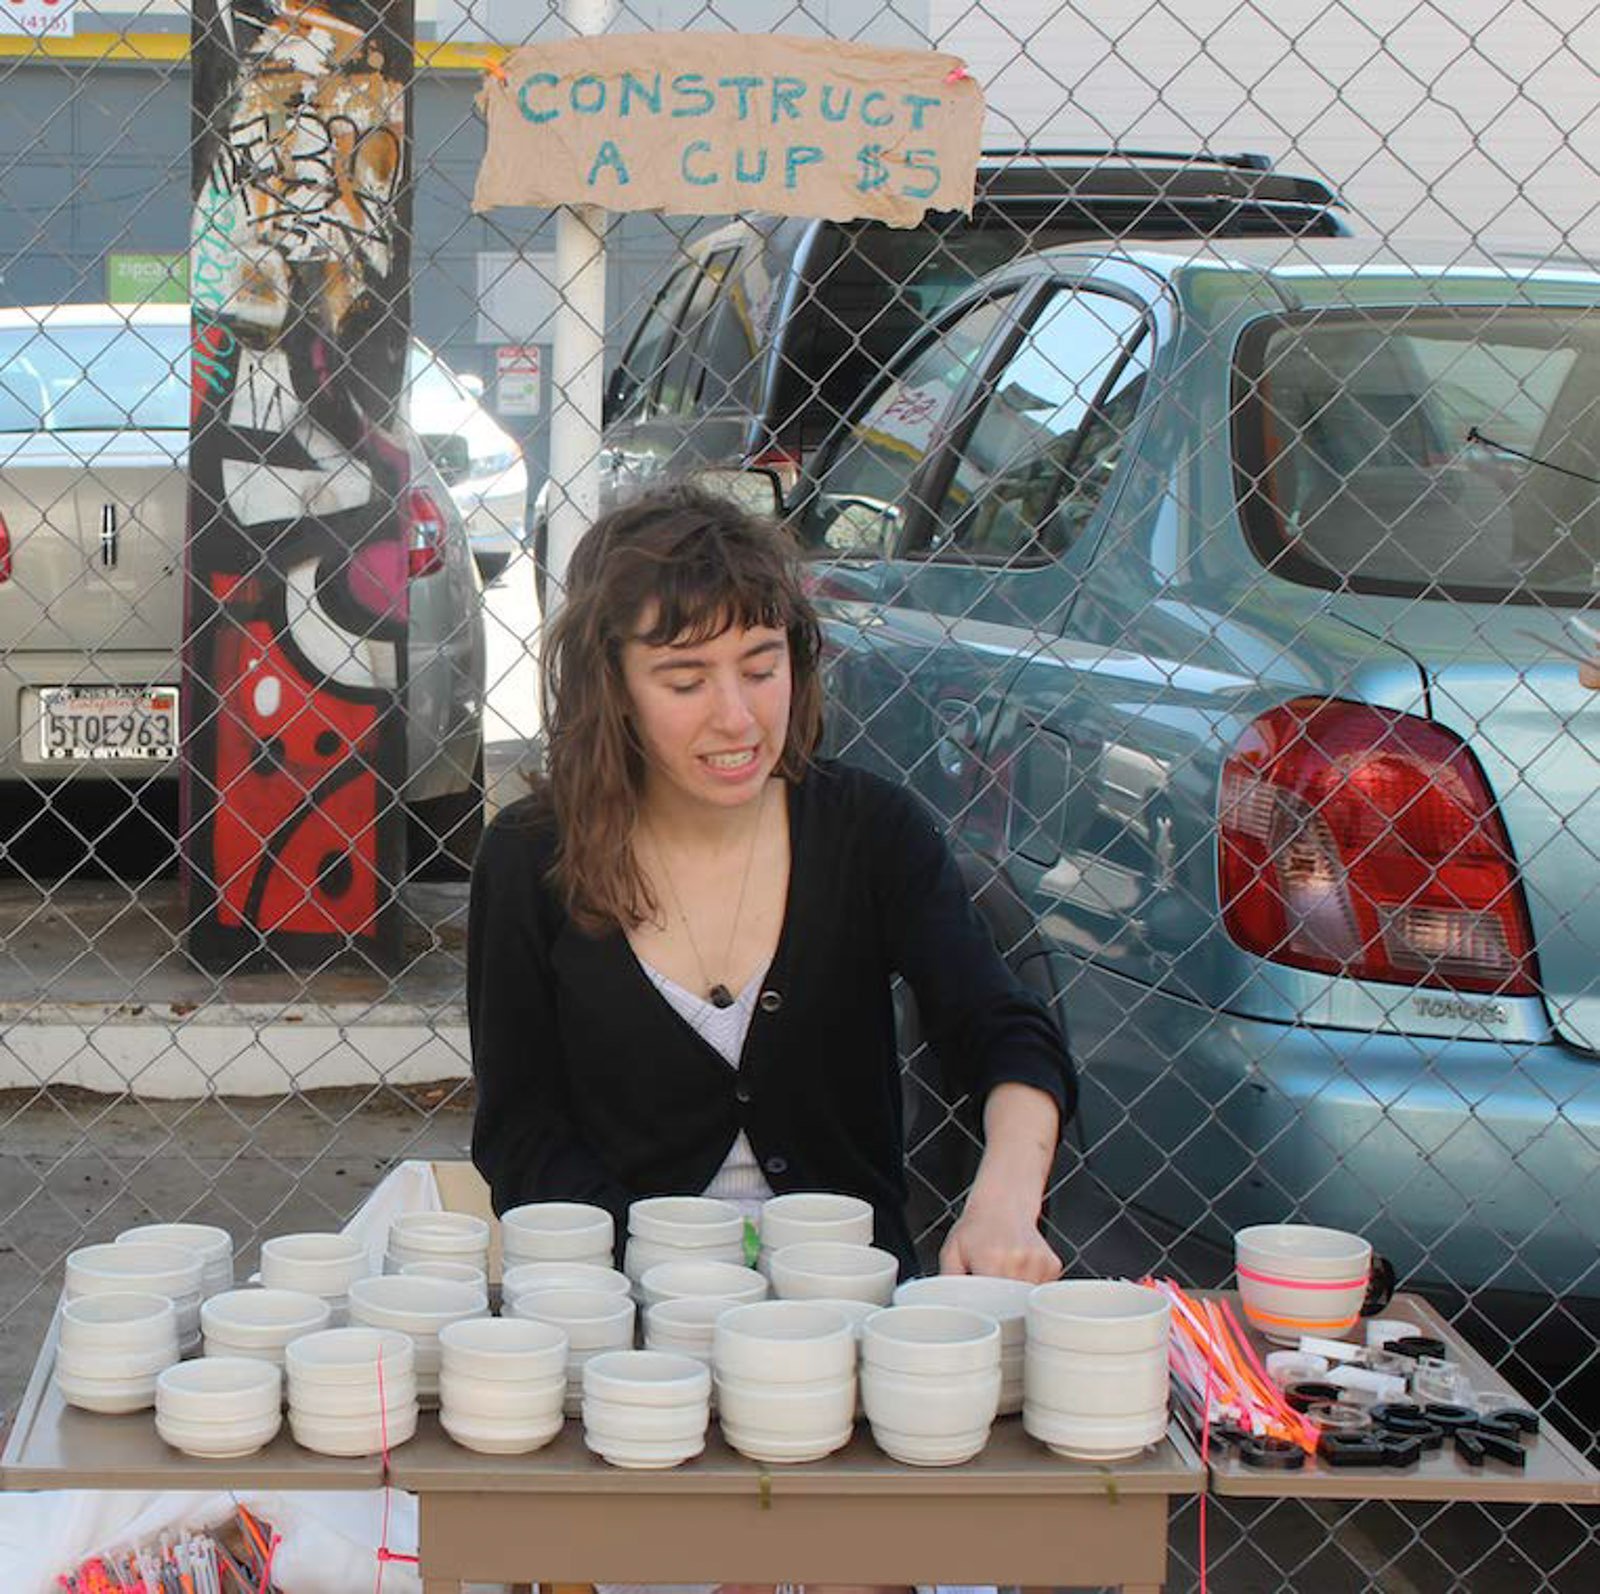 A young woman sits at a table filled with ceramic cups of various sizes and widths.